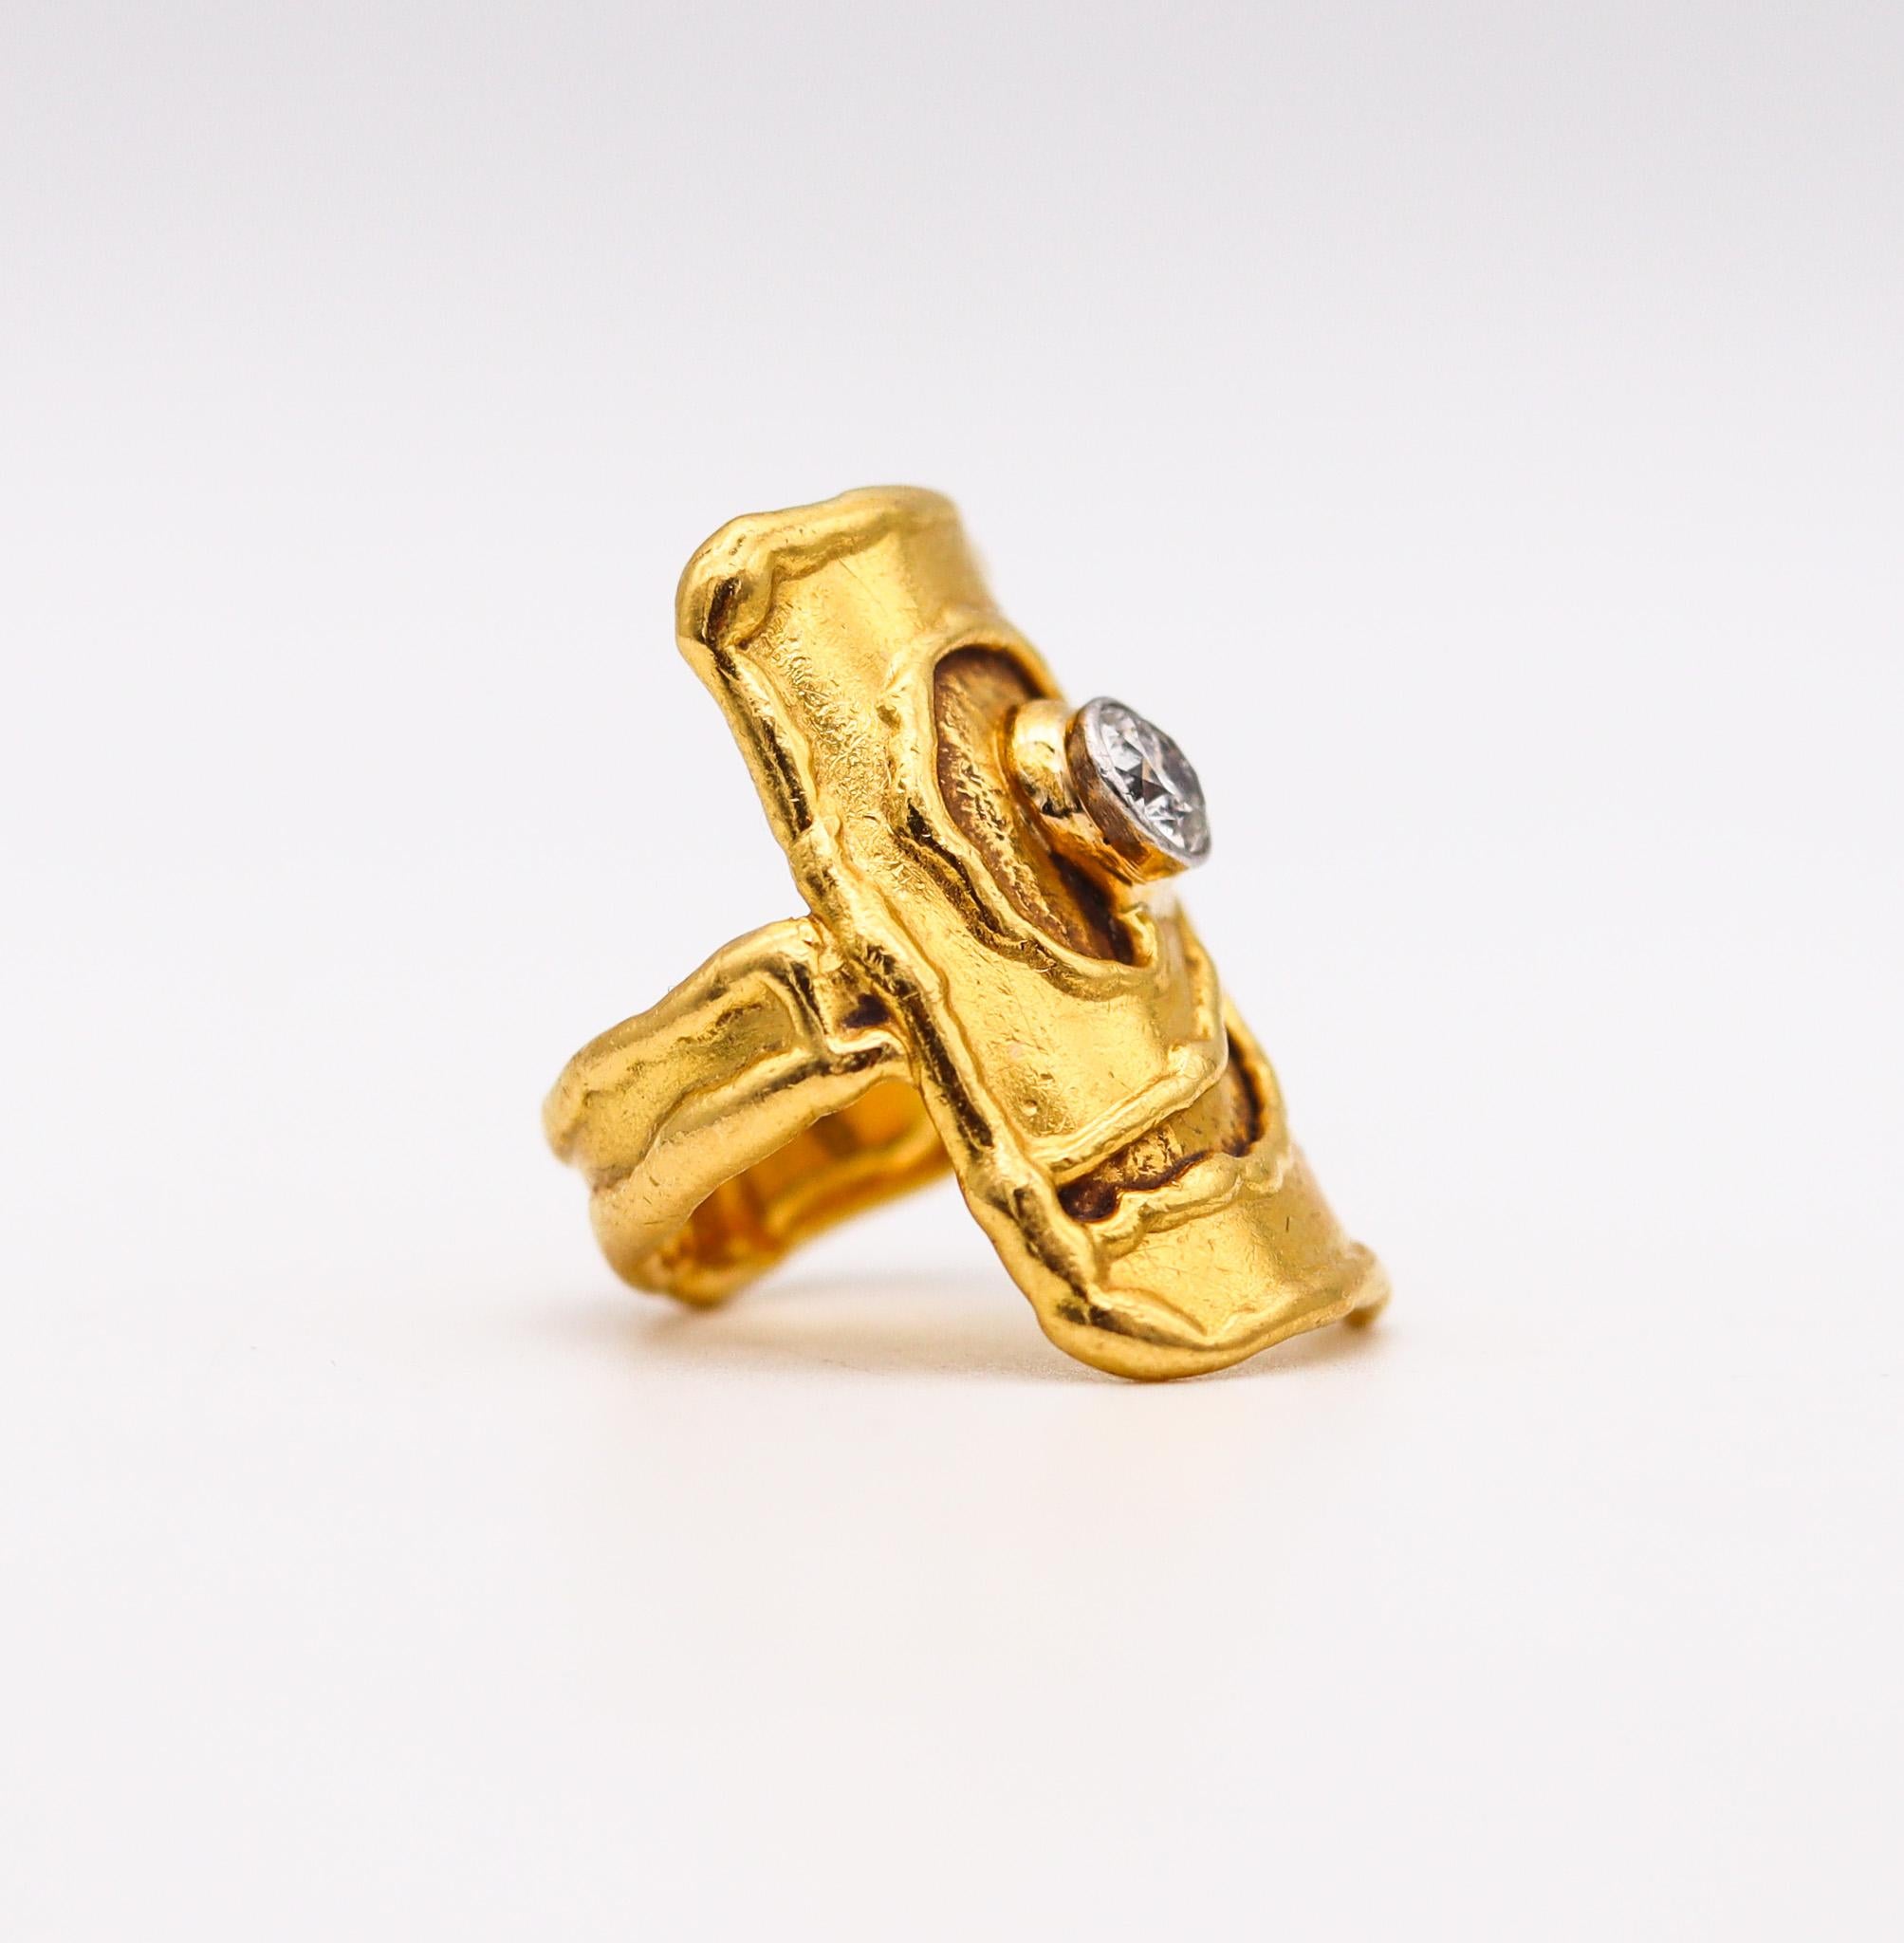 Modernist Jean Mahie Paris 1980 Abstract Sculptural Ring In 22Kt Gold With 0.60 Ct Diamond